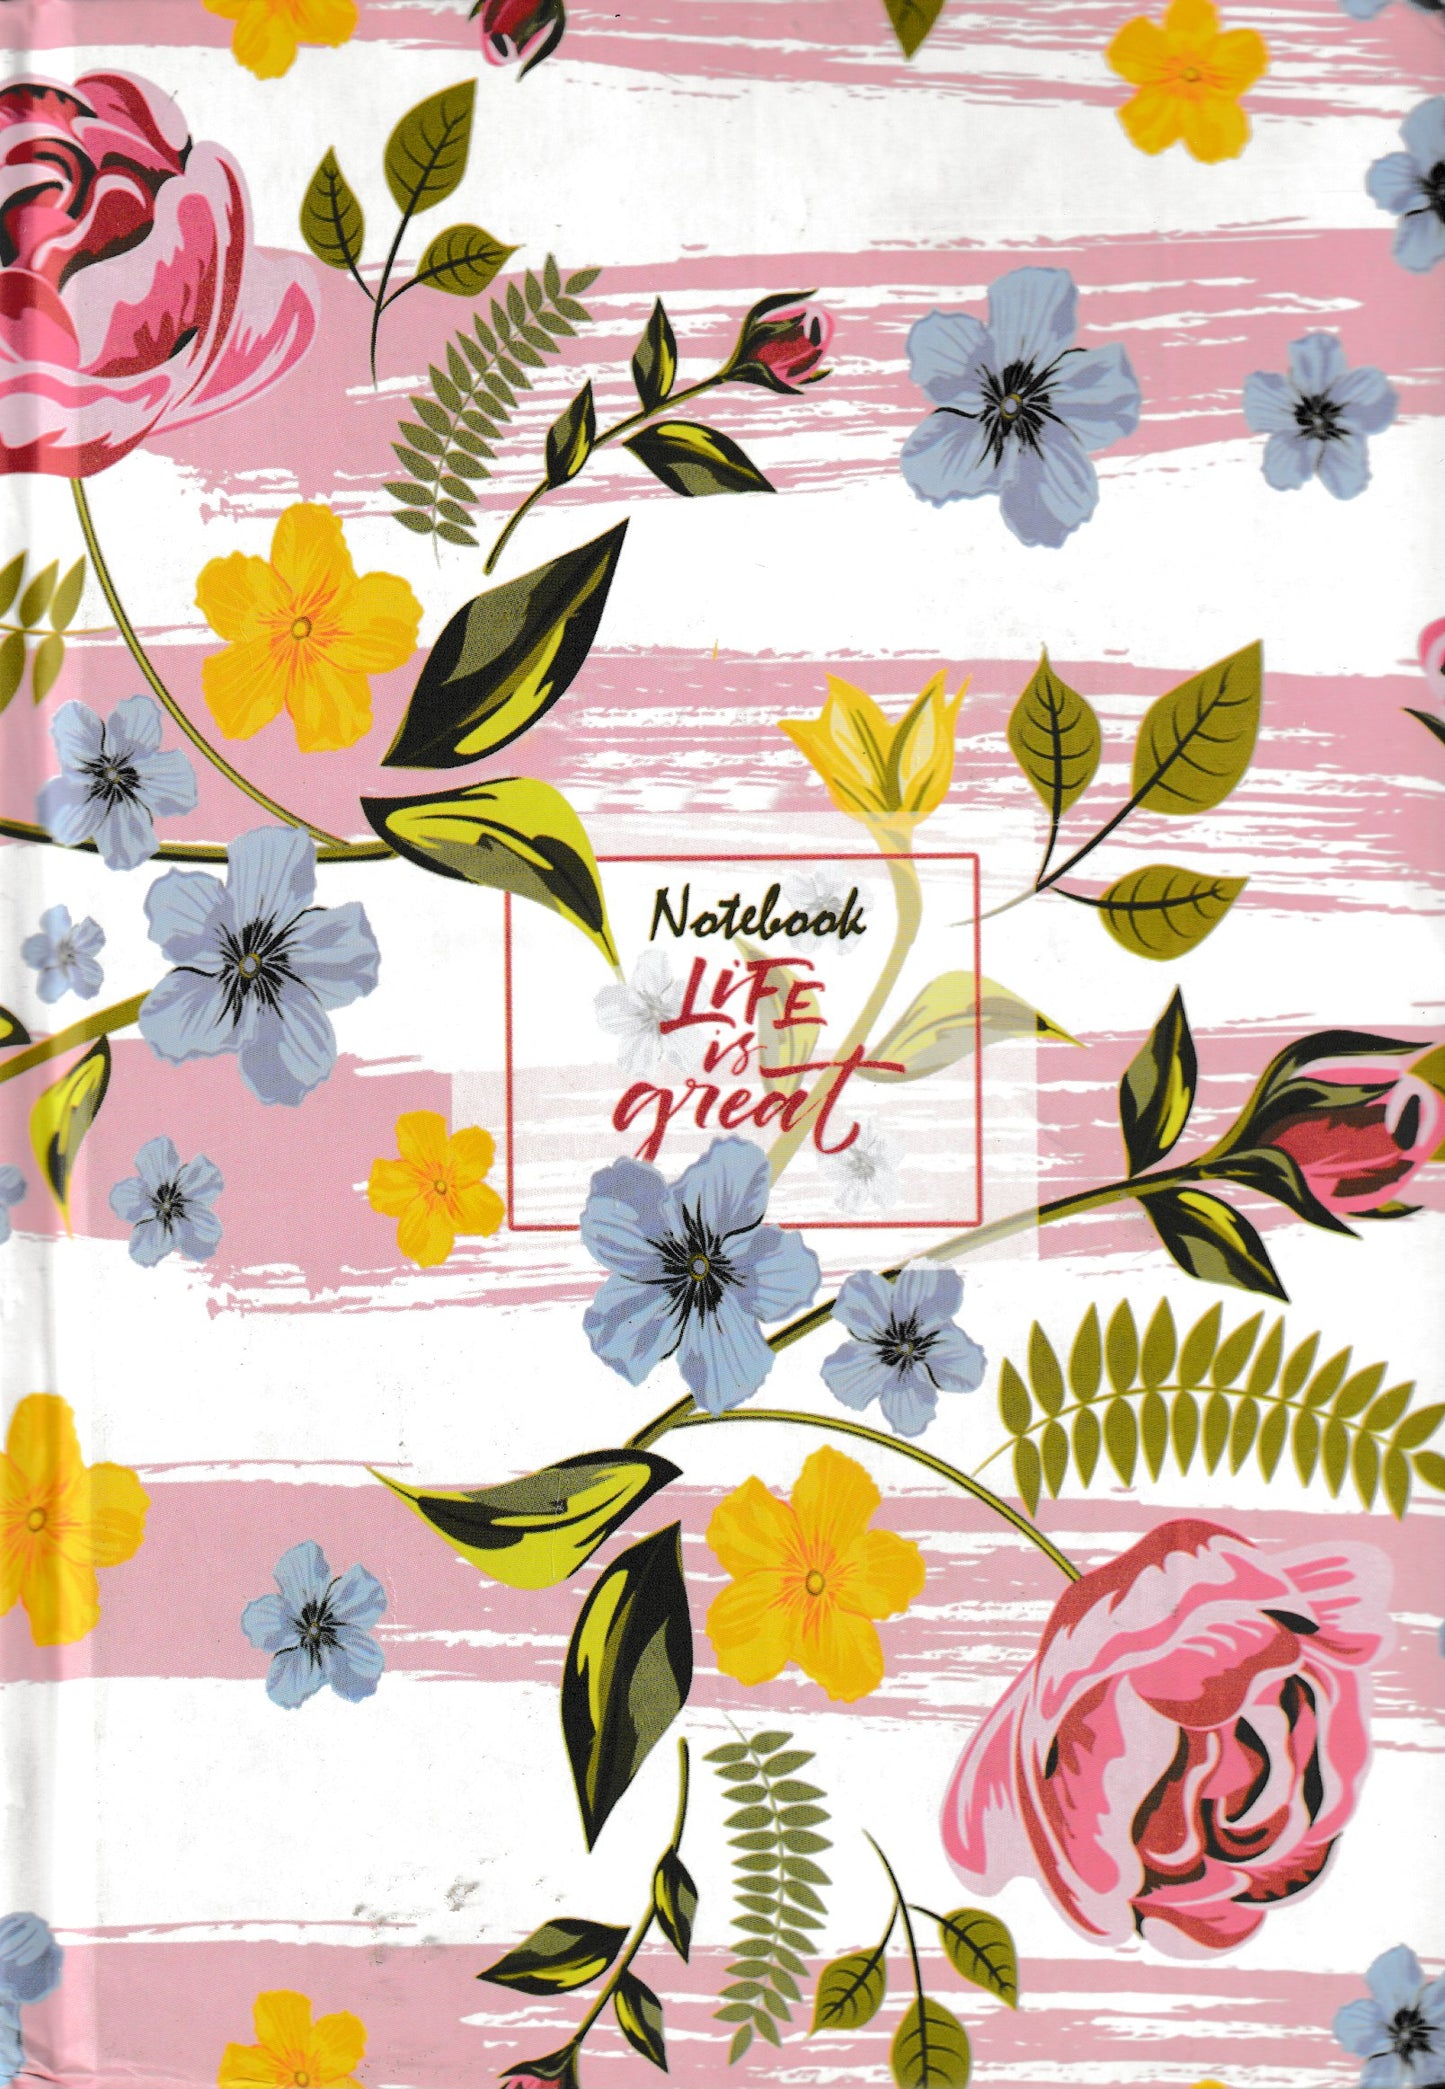 Notebook Life is great دفتر نوتة